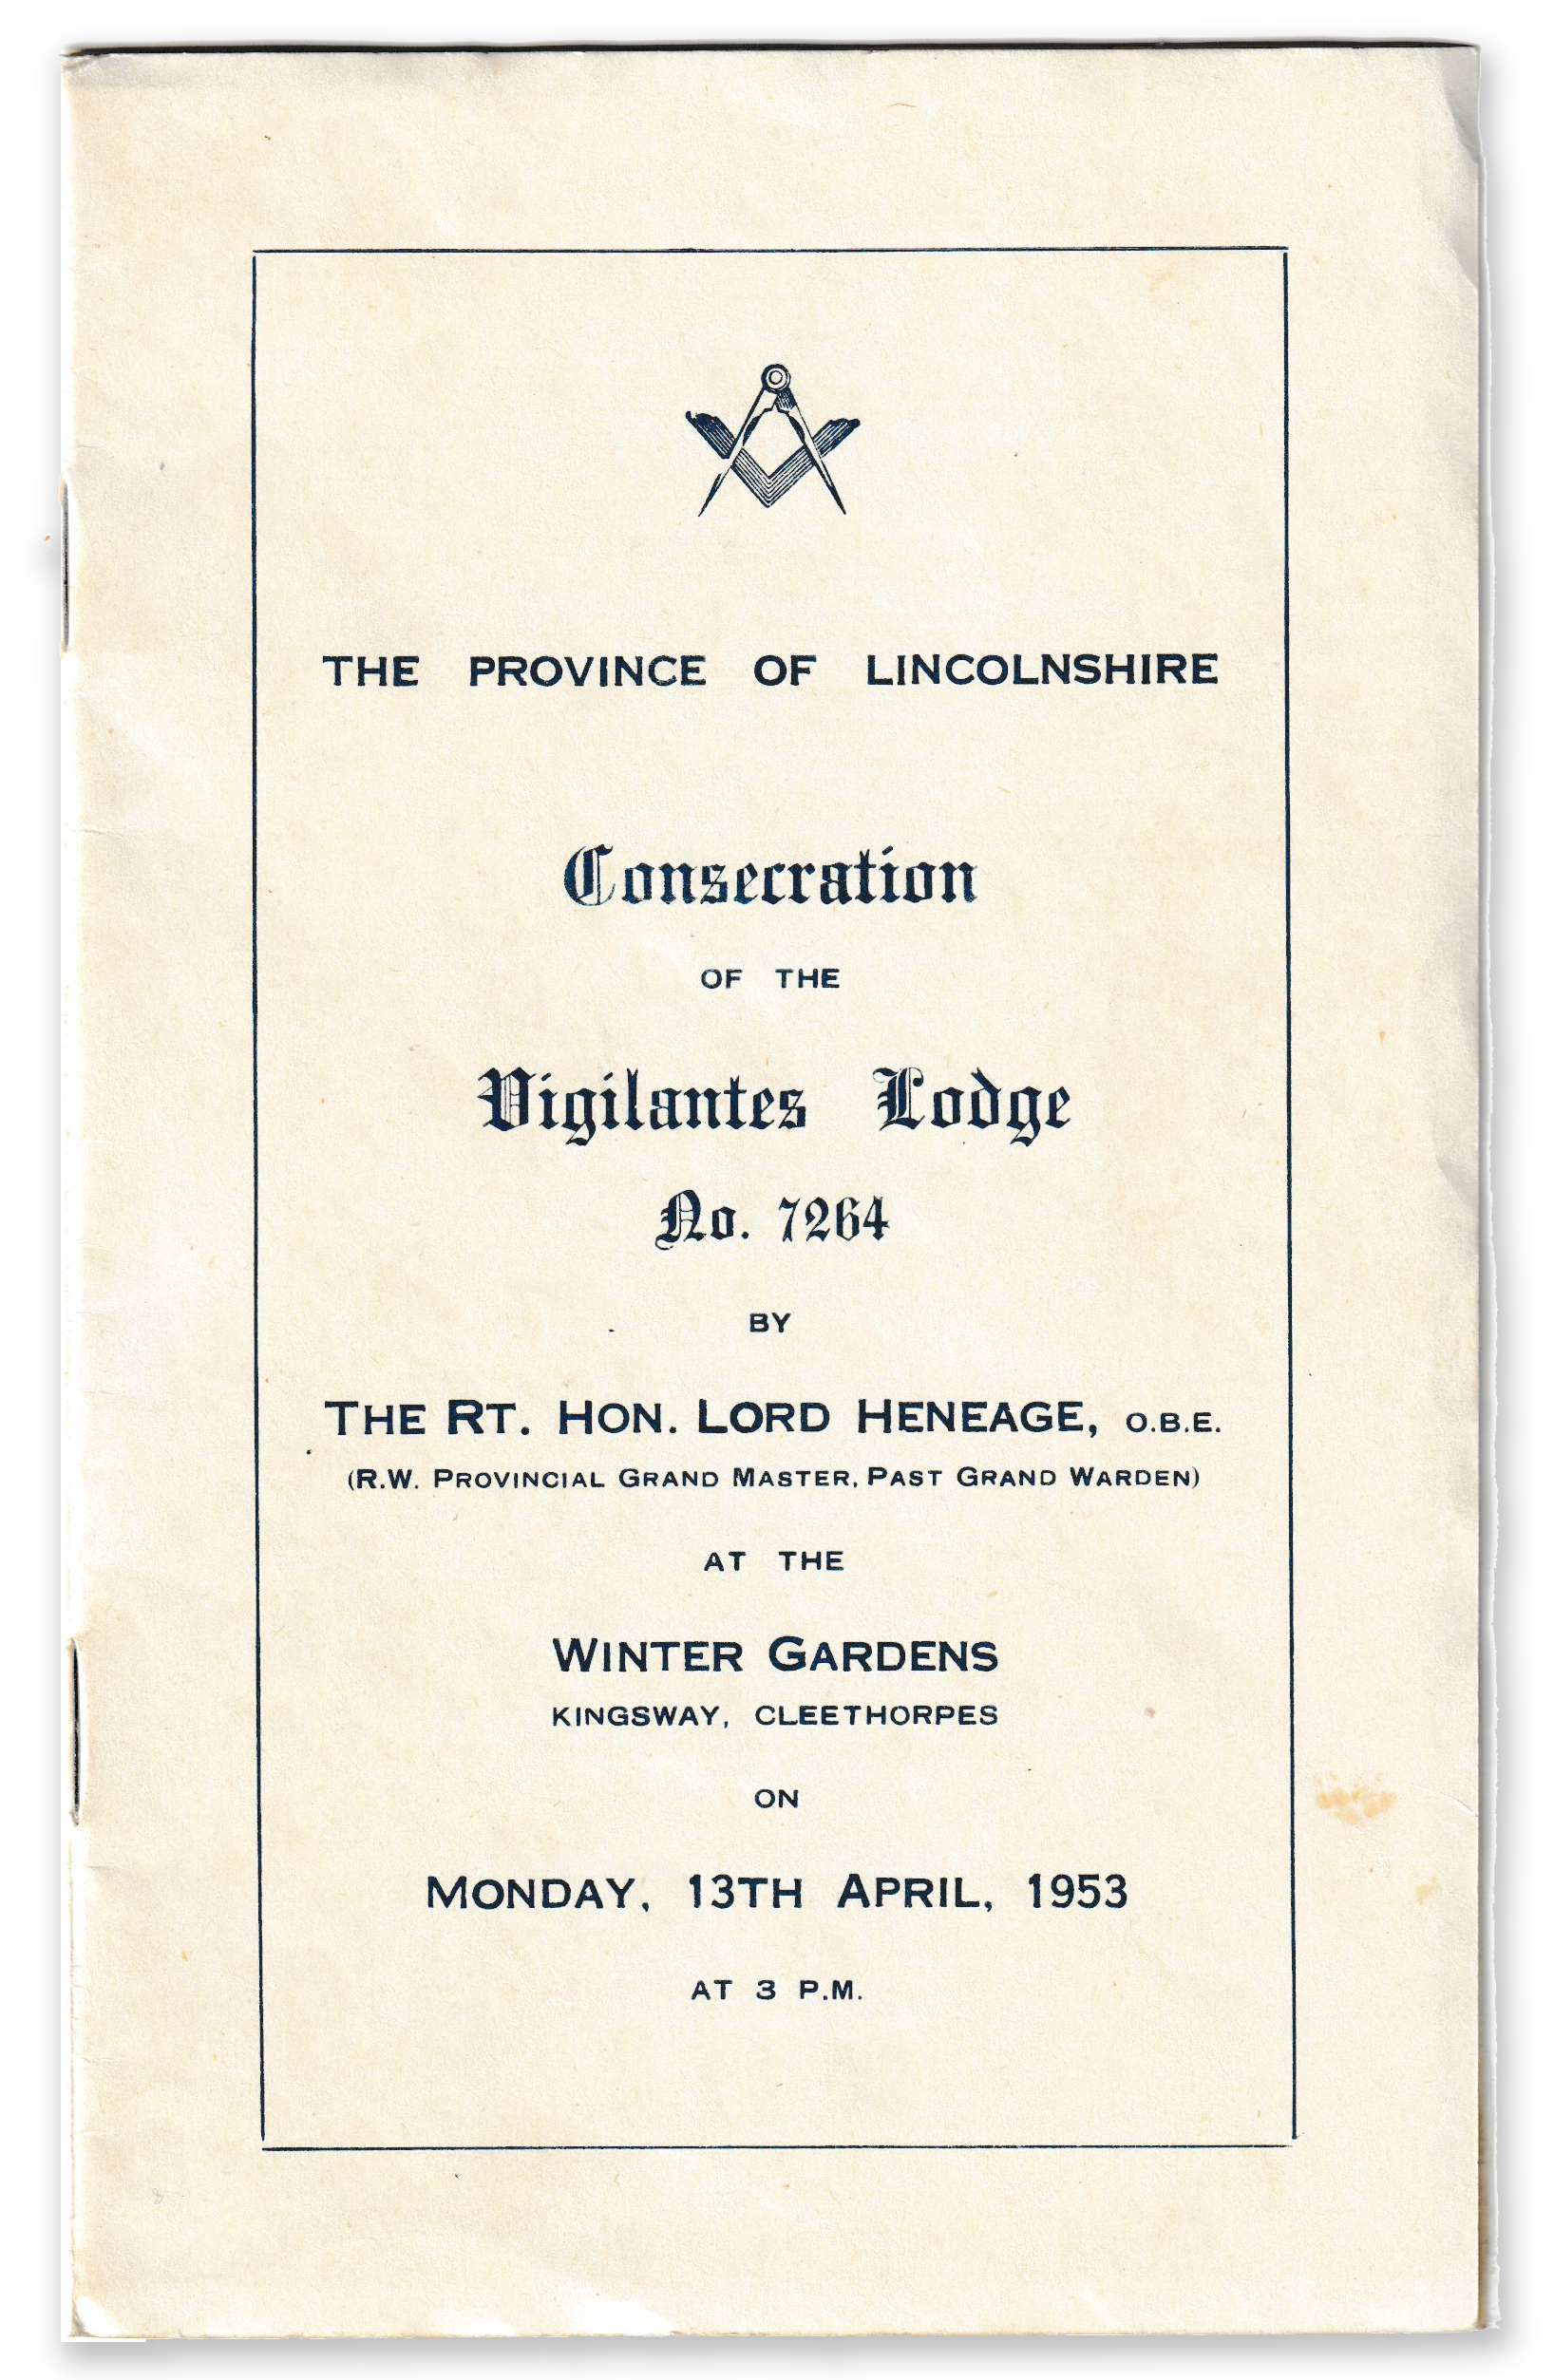 The Summons cover for the 1953 Consecration of Vigilantes Lodge